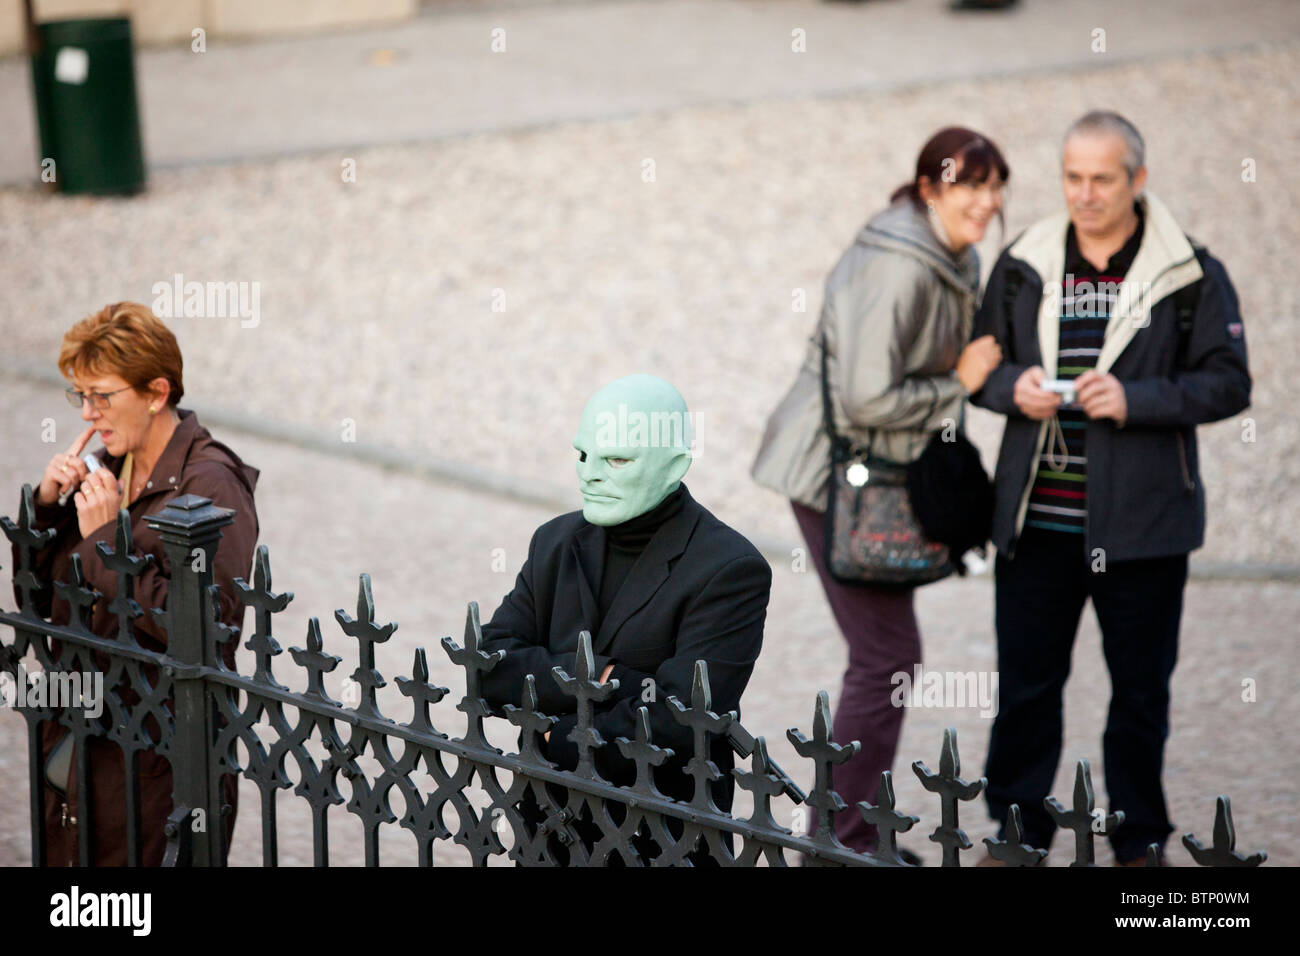 Fantomas High Resolution Stock Photography and Images - Alamy